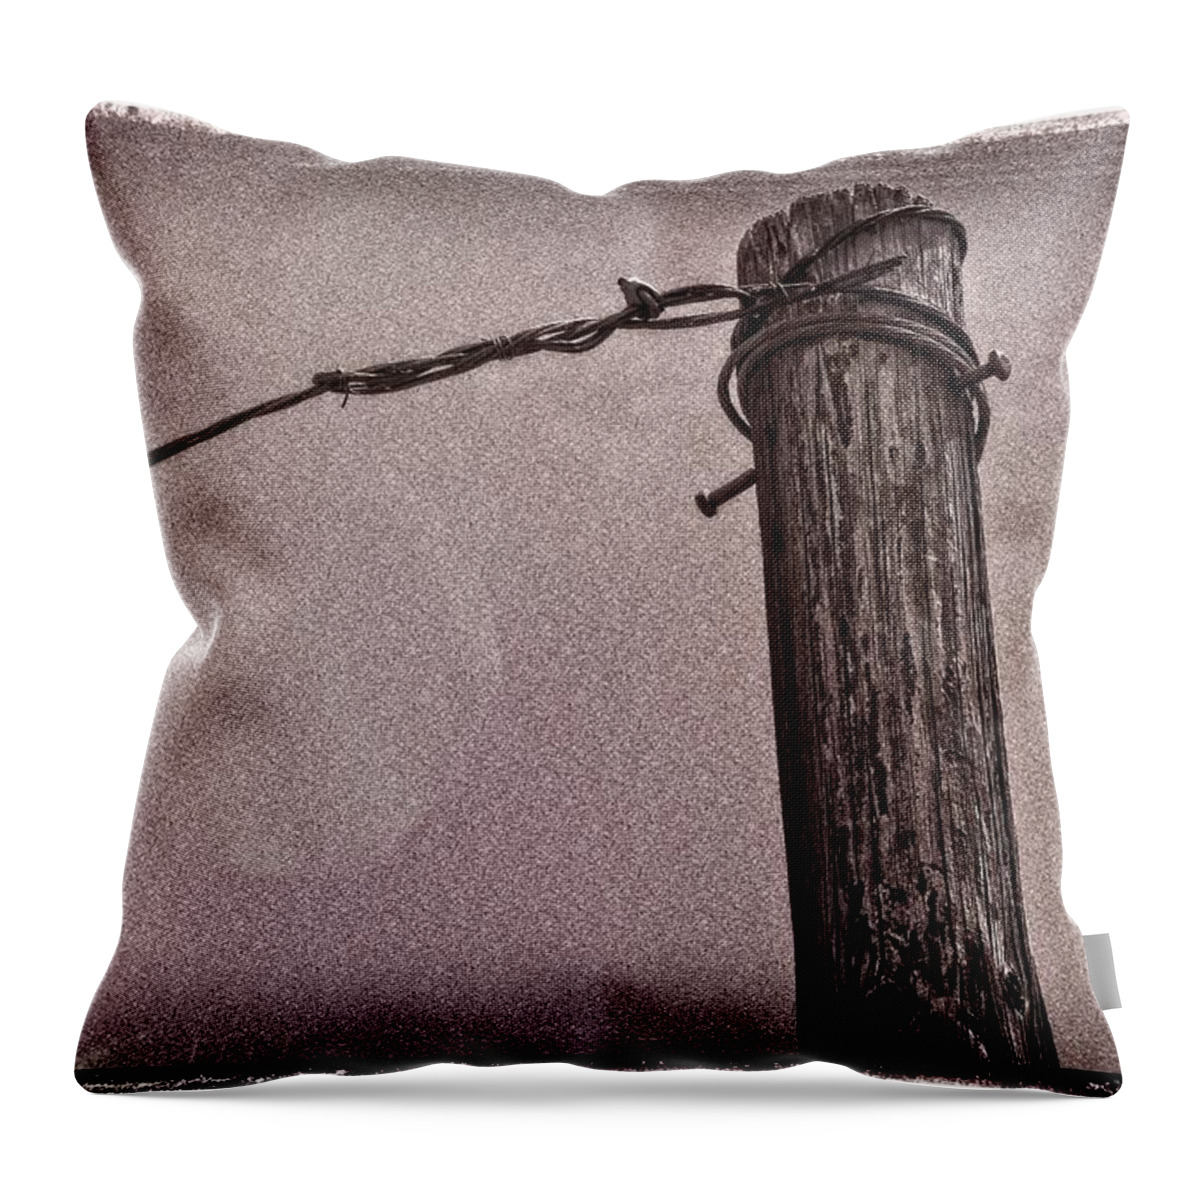 Abandoned Throw Pillow featuring the digital art They Went That Way by David Desautel